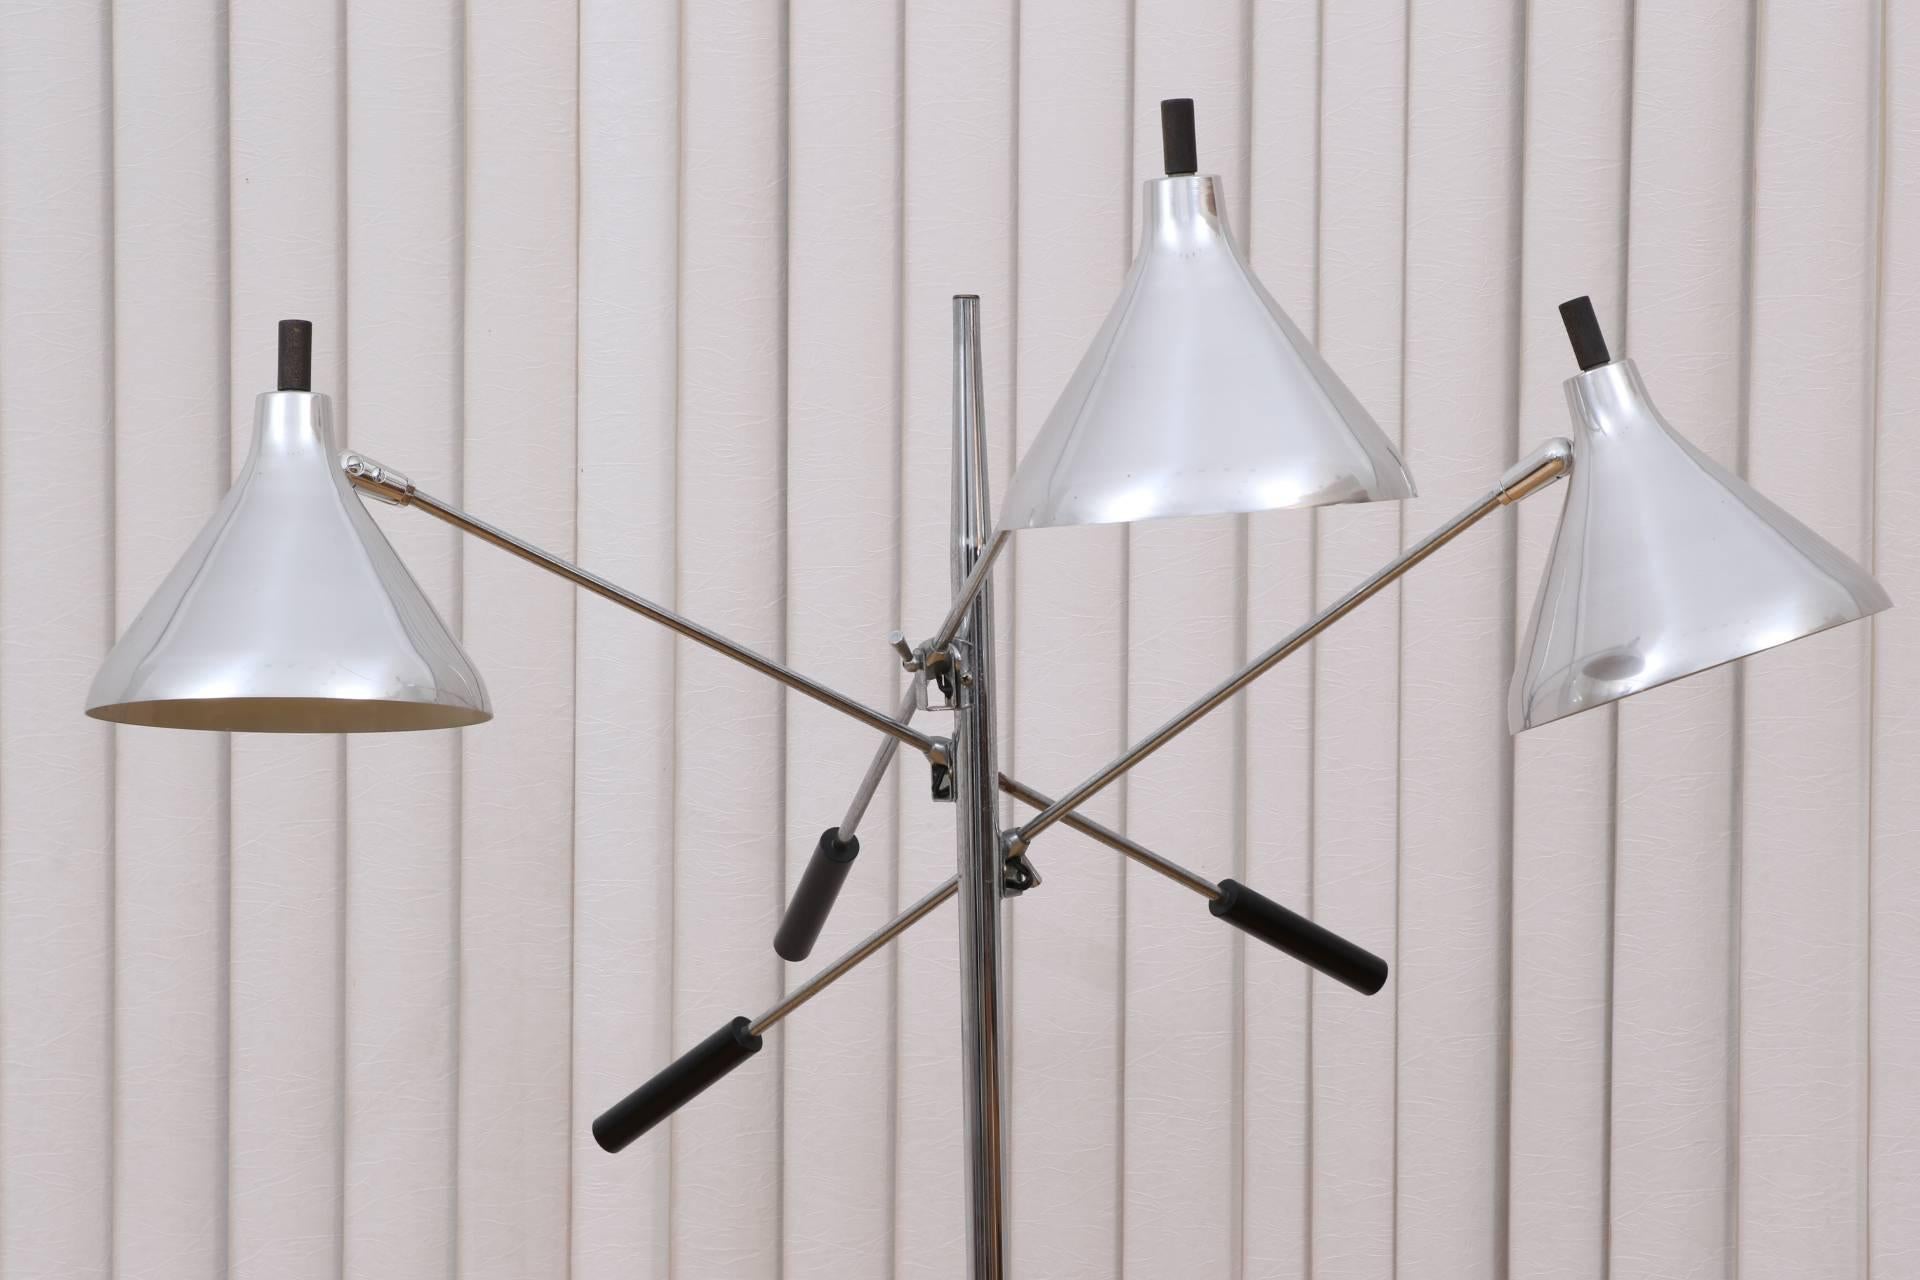 Tall chrome and black metal standard on a black metal round base, with three adjustable long chrome arms with black ends and adjustable aluminium shades with wood finials, circa 1960s. The adjustable knob and light switch on the